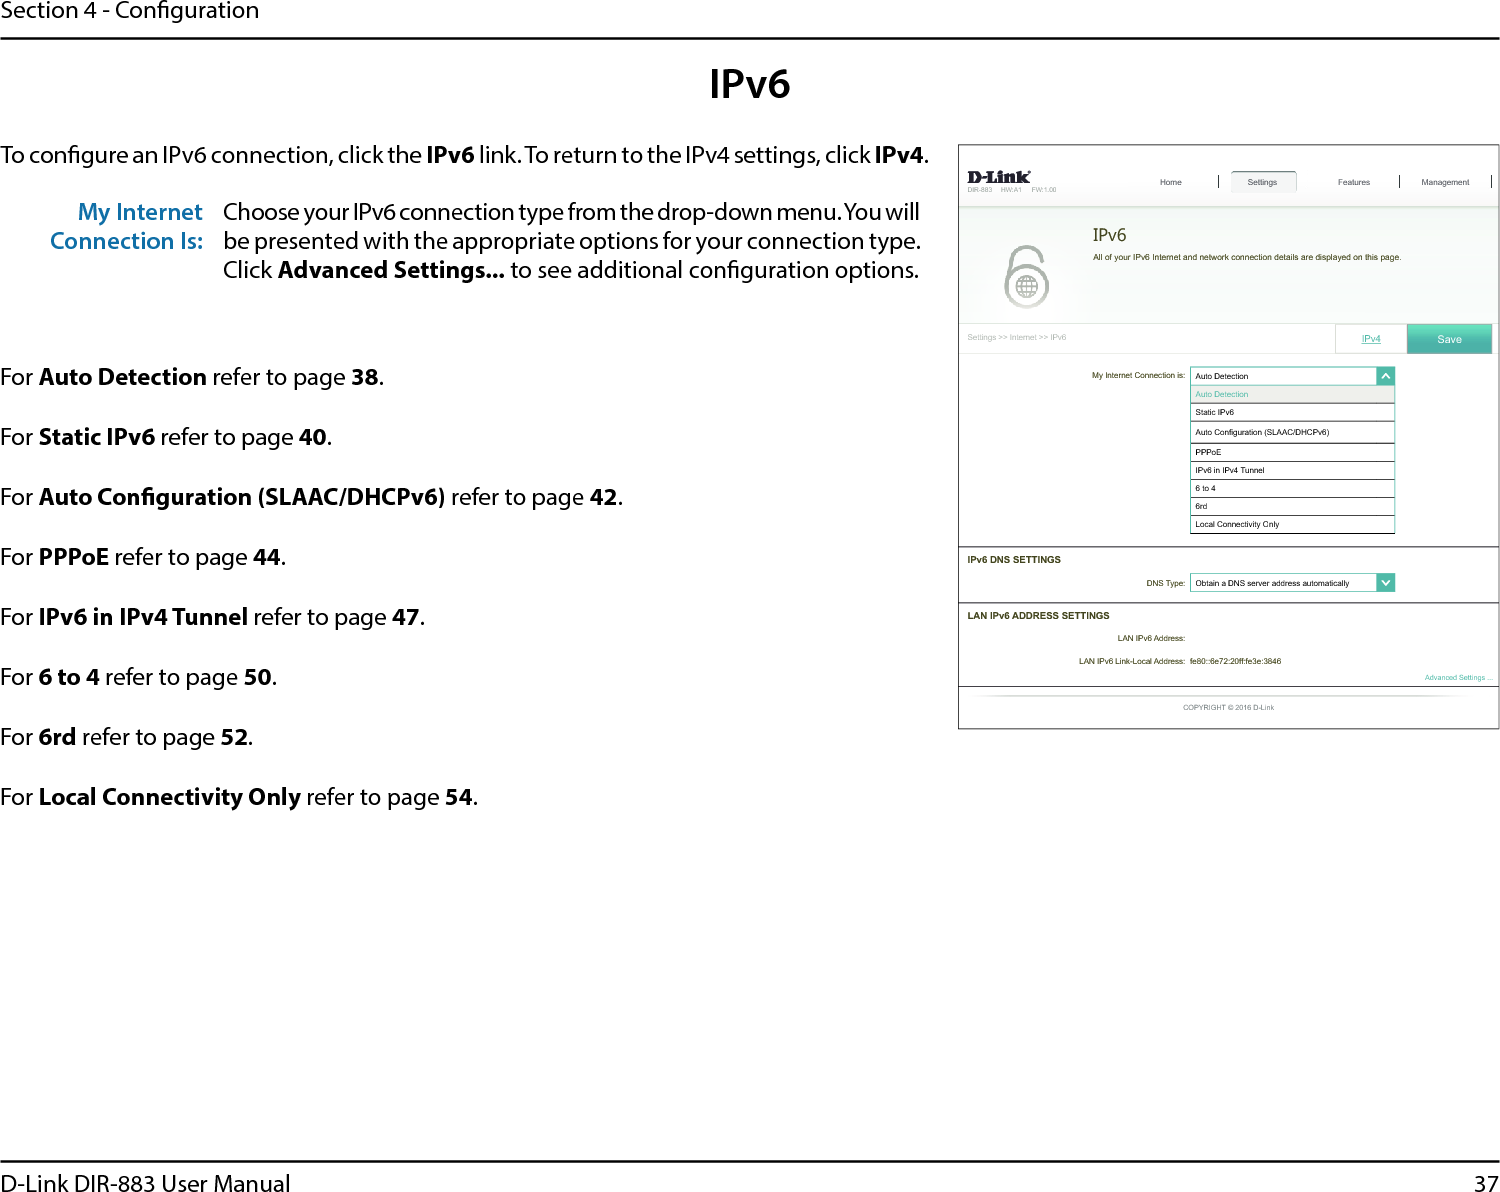 37D-Link DIR-883 User ManualSection 4 - CongurationIPv6To congure an IPv6 connection, click the IPv6 link. To return to the IPv4 settings, click IPv4.For Auto Detection refer to page 38.For Static IPv6 refer to page 40.For Auto Conguration (SLAAC/DHCPv6) refer to page 42.For PPPoE refer to page 44.For IPv6 in IPv4 Tunnel refer to page 47.For 6 to 4 refer to page 50.For 6rd refer to page 52.For Local Connectivity Only refer to page 54.My Internet Connection Is:Choose your IPv6 connection type from the drop-down menu. You will be presented with the appropriate options for your connection type. Click Advanced Settings... to see additional conguration options.My Internet Connection is: $XWR&apos;HWHFWLRQ໹$XWR&apos;HWHFWLRQ6WDWLF,3Y$XWR&amp;RQ¿JXUDWLRQ6/$$&amp;&apos;+&amp;3YPPPoE,3YLQ,3Y7XQQHOWRUG/RFDO&amp;RQQHFWLYLW\2QO\&apos;,5 +:$ ):6HWWLQJV!!,QWHUQHW!!,3Y6HWWLQJV+RPH Features Management,3Y 6DYHIPv6$OORI\RXU,3Y,QWHUQHWDQGQHWZRUNFRQQHFWLRQGHWDLOVDUHGLVSOD\HGRQWKLVSDJH&apos;167\SH 2EWDLQD&apos;16VHUYHUDGGUHVVDXWRPDWLFDOO\໹,3Y&apos;166(77,1*6$GYDQFHG6HWWLQJV/$1,3Y$&apos;&apos;5(666(77,1*6/$1,3Y$GGUHVV/$1,3Y/LQN/RFDO$GGUHVV IHHIIIHH&amp;23&lt;5,*+7&apos;/LQN